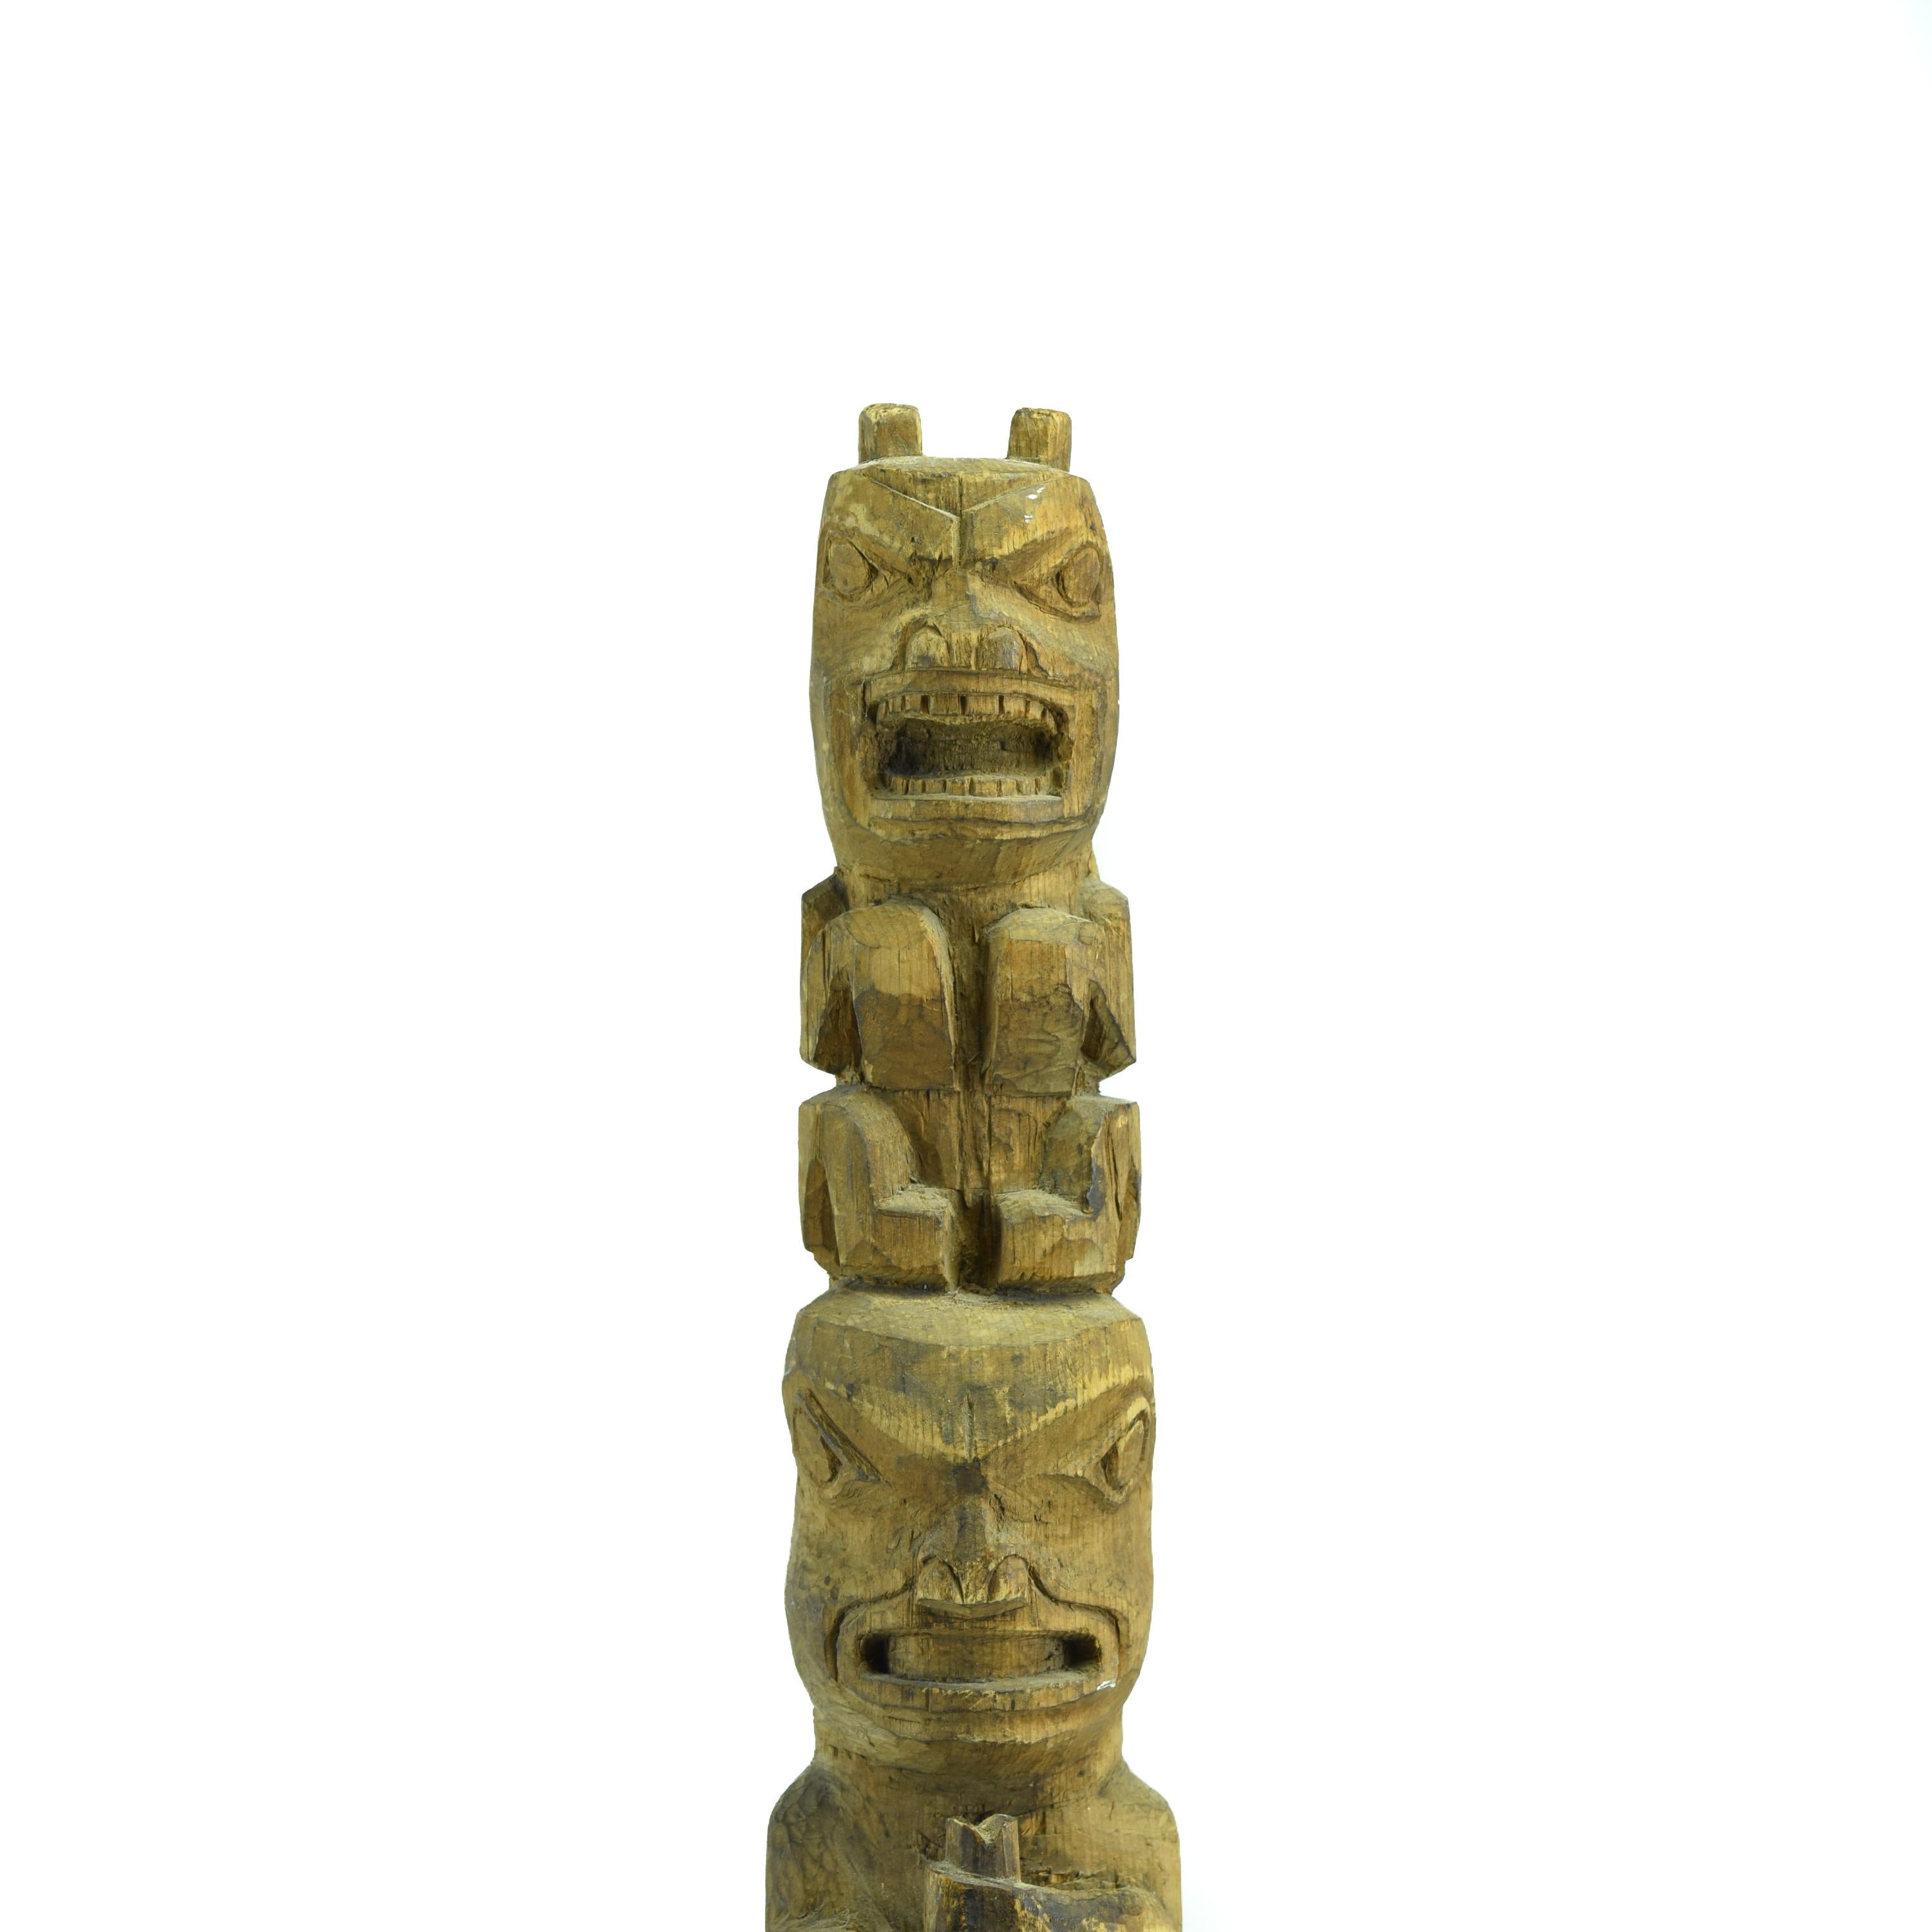 Complex Multifigure Tlingit Totem Pole from Sitka, Alaska. This larger red cedar model totem pole was carved by a Tlingit artist from Sitka, Alaska. The pole is unusually complex for a Tlingit pole and features seven interlocking figures. The pole